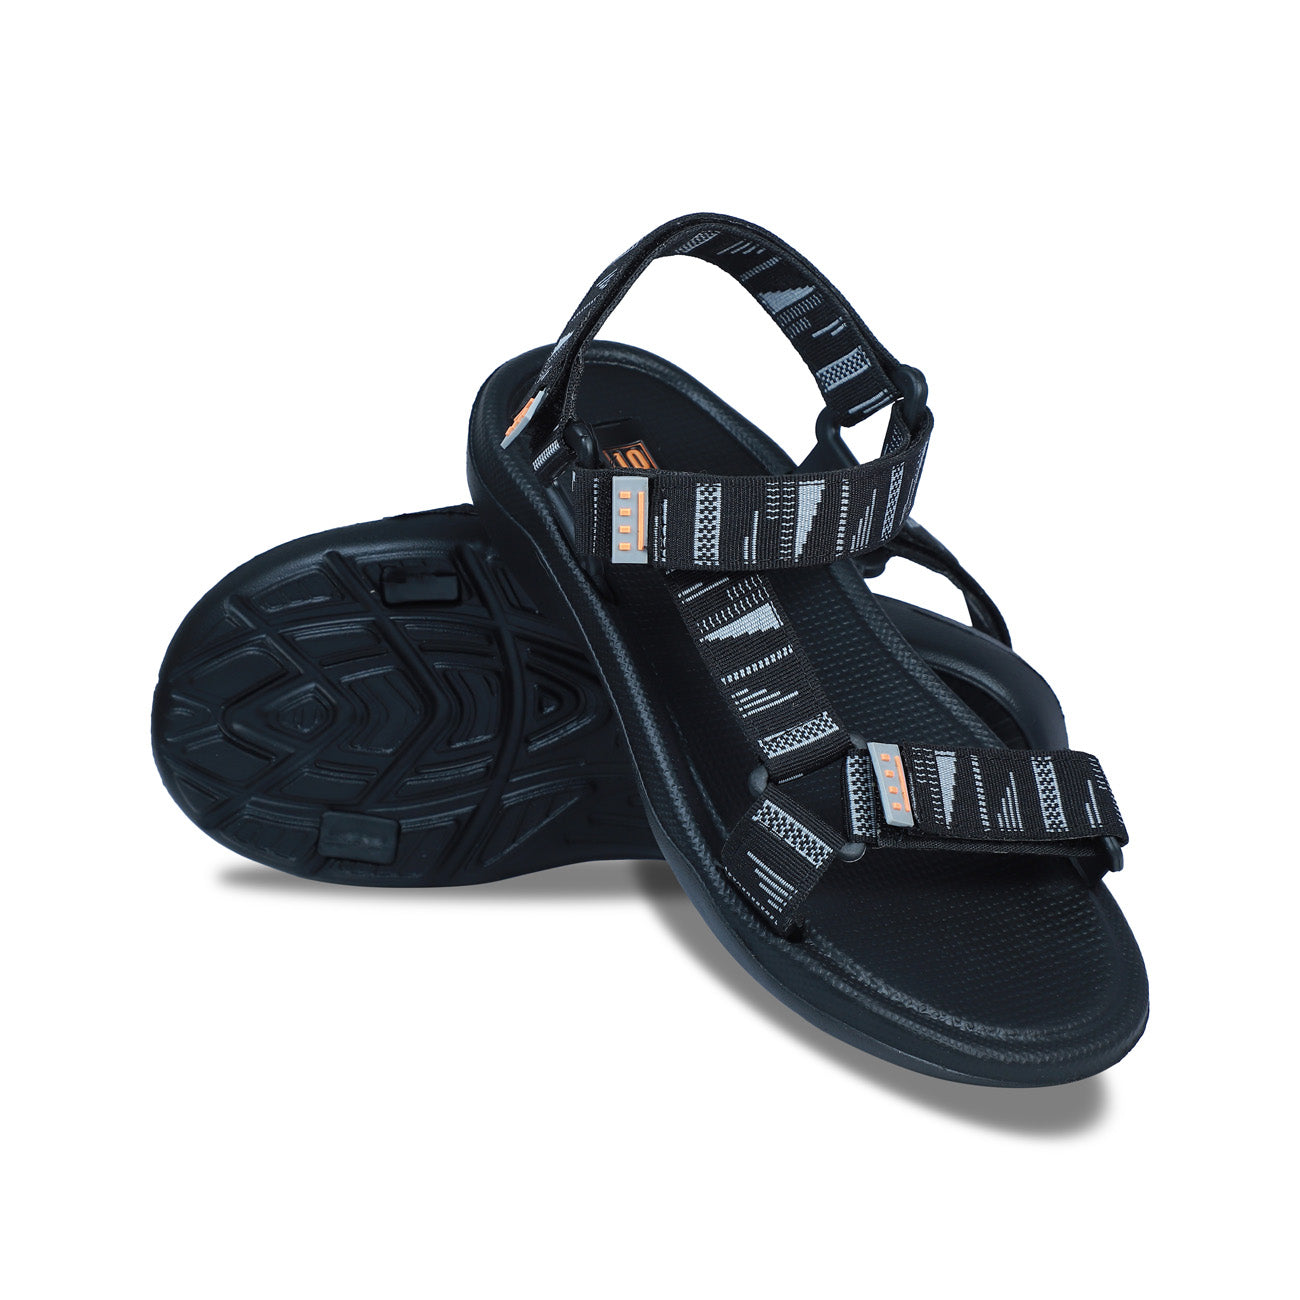 Paragon EVK1417G Mens Sandals Stylish Sandals | Comfortable Sporty Sandals | Daily Outdoor Use | Casual Wear | Cushioned Soles